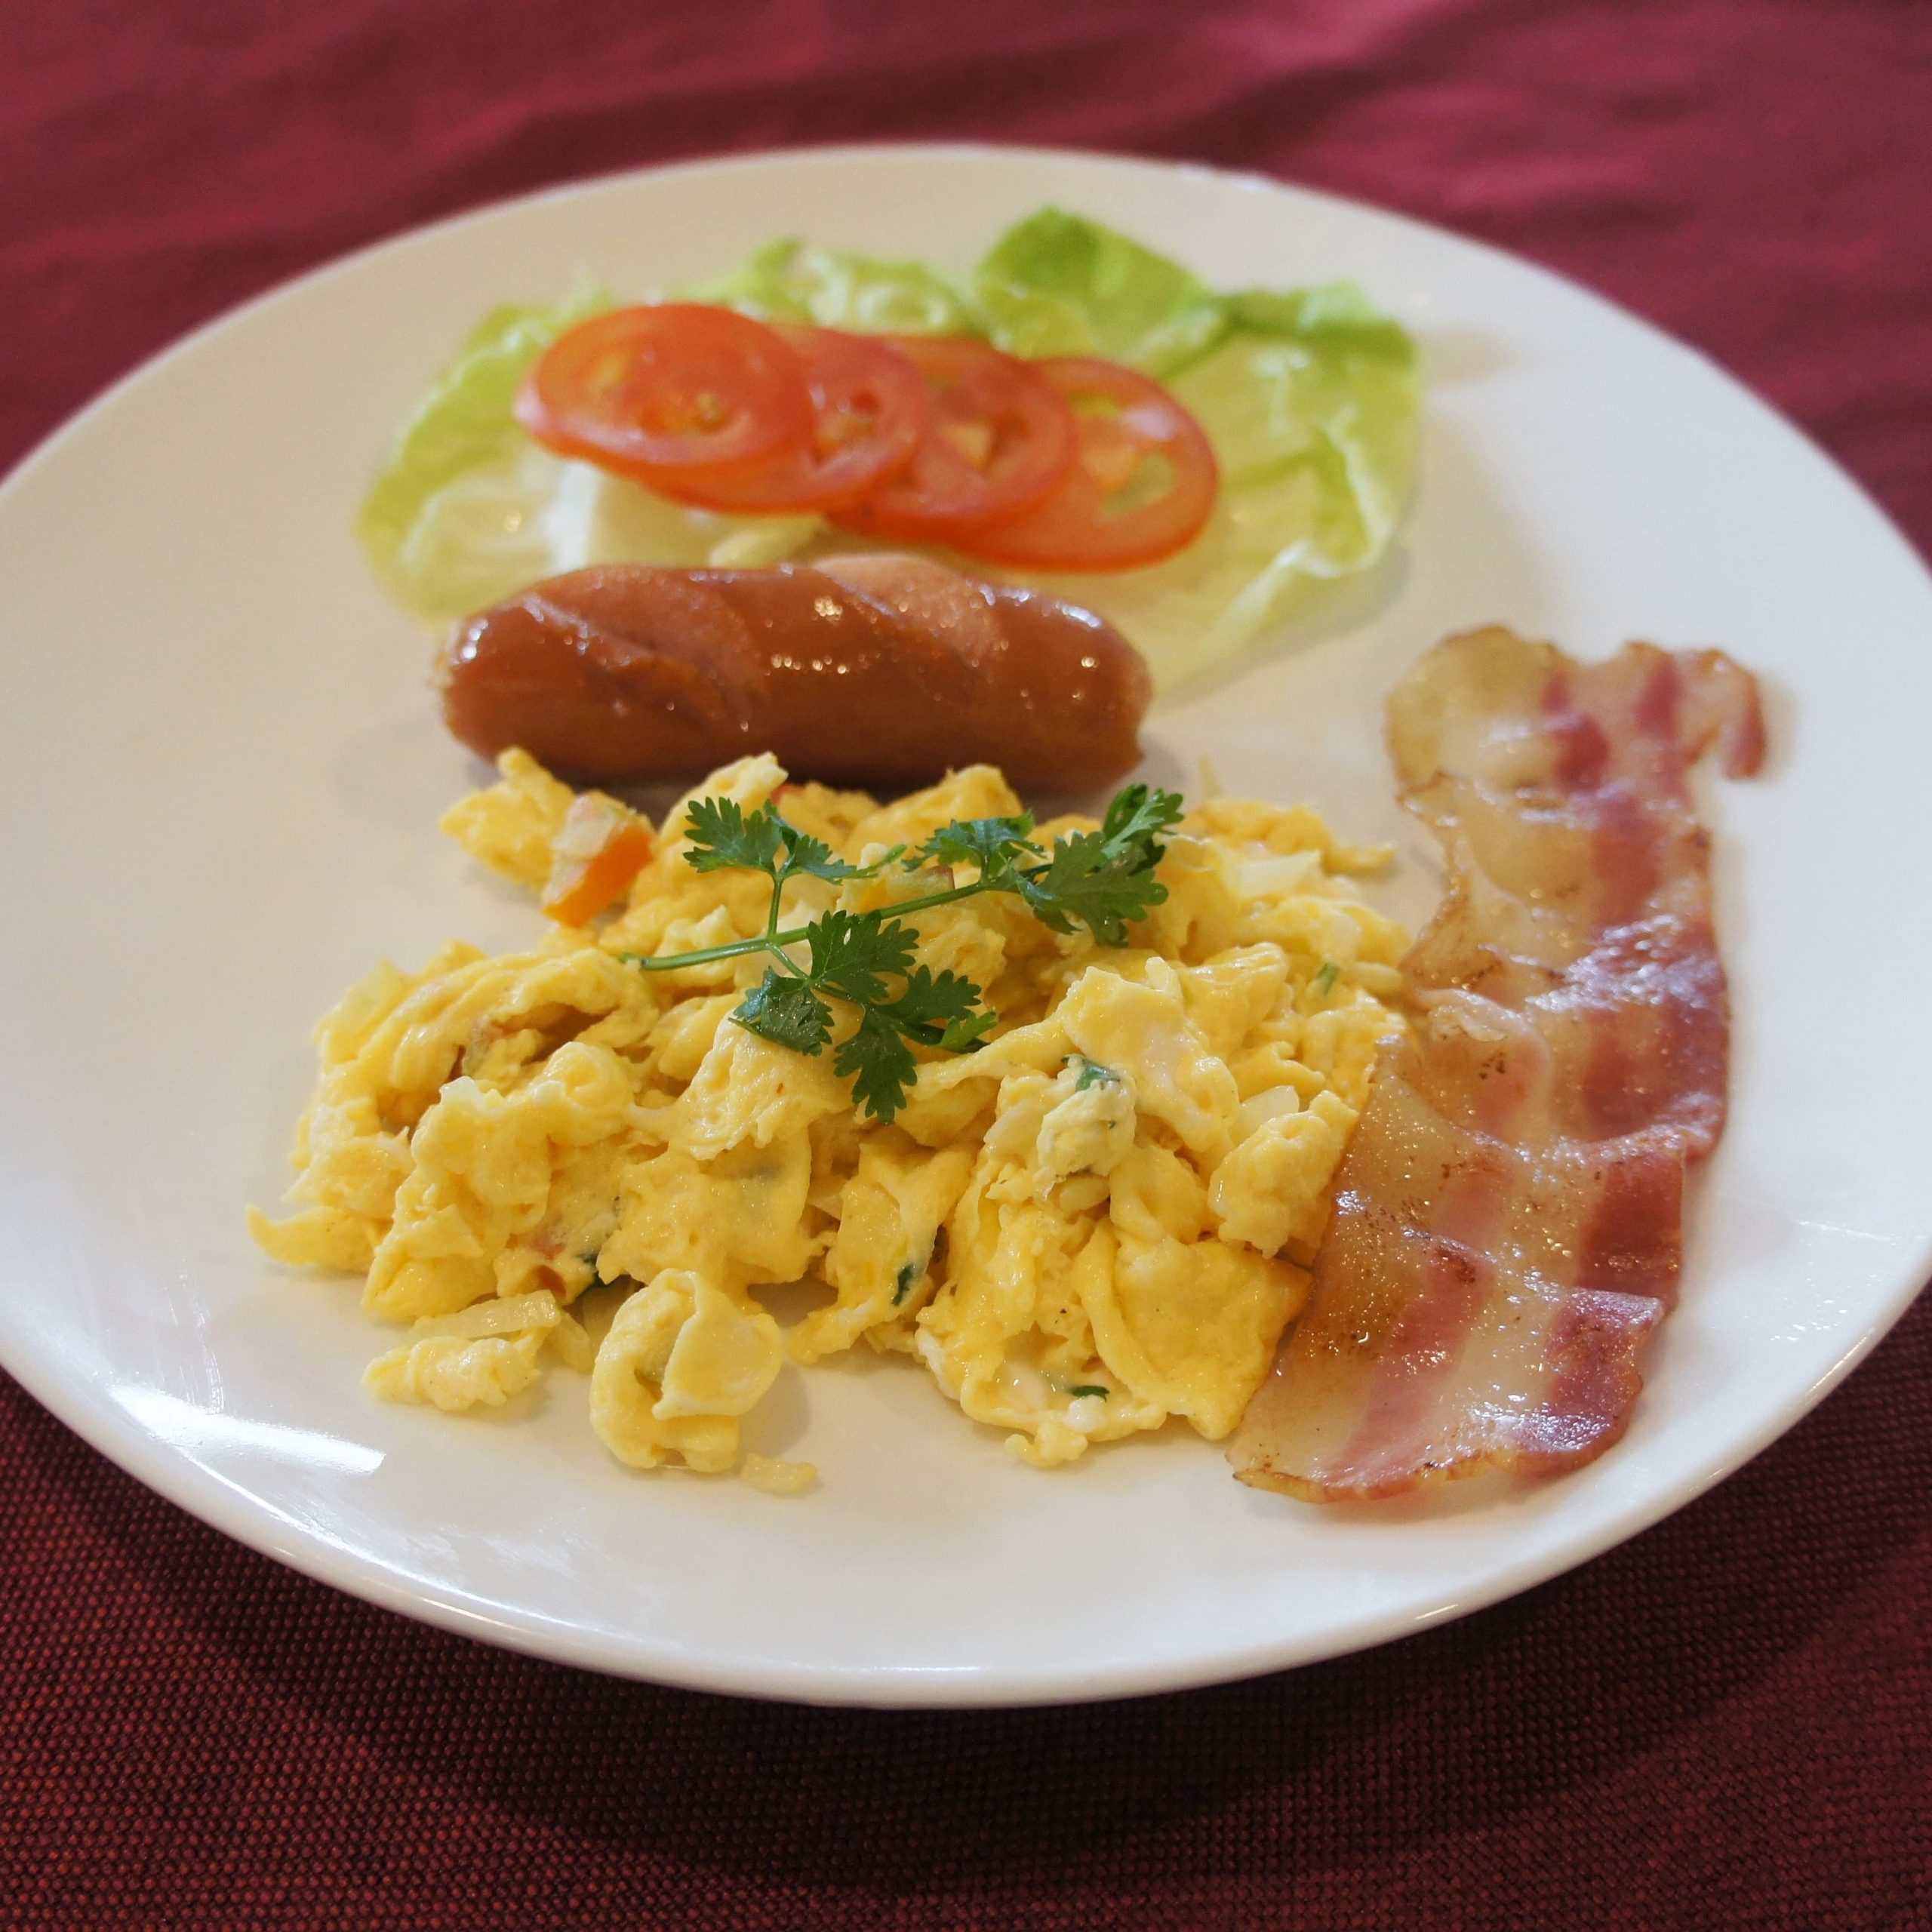 Scrambled eggs with grilled bacon sausages scaled